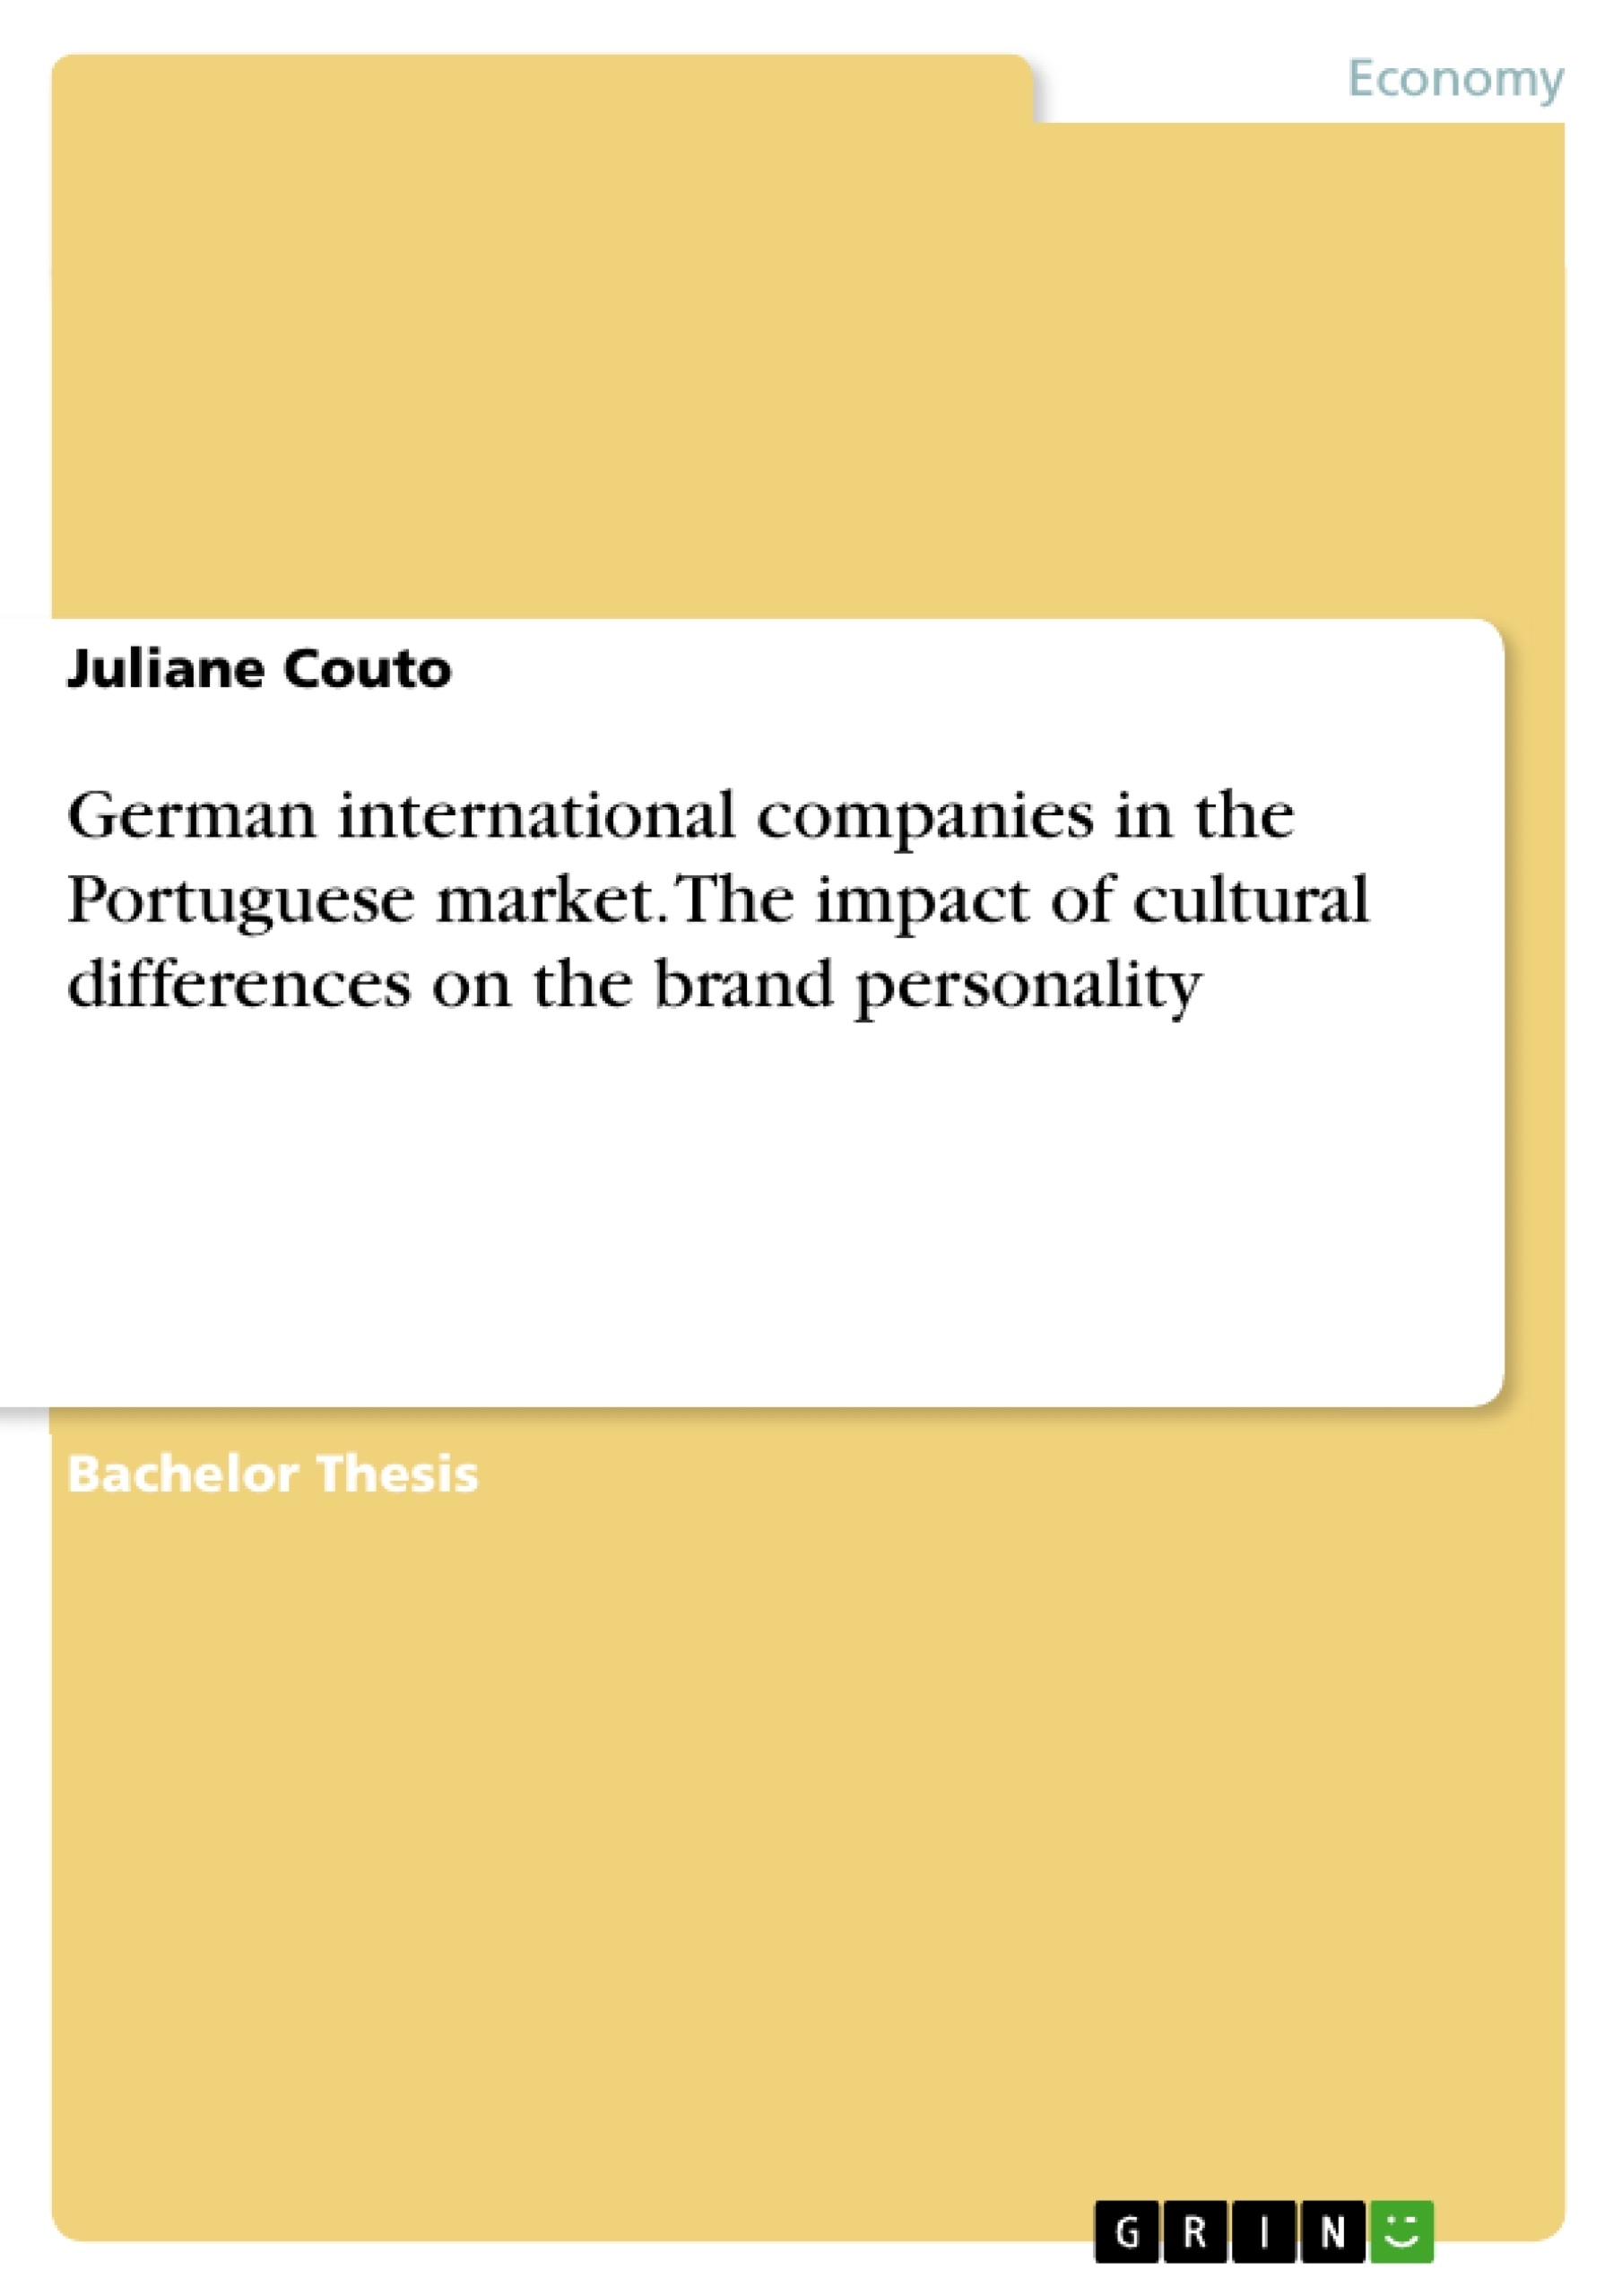 Title: German international companies in the Portuguese market. The impact of cultural differences on the brand personality